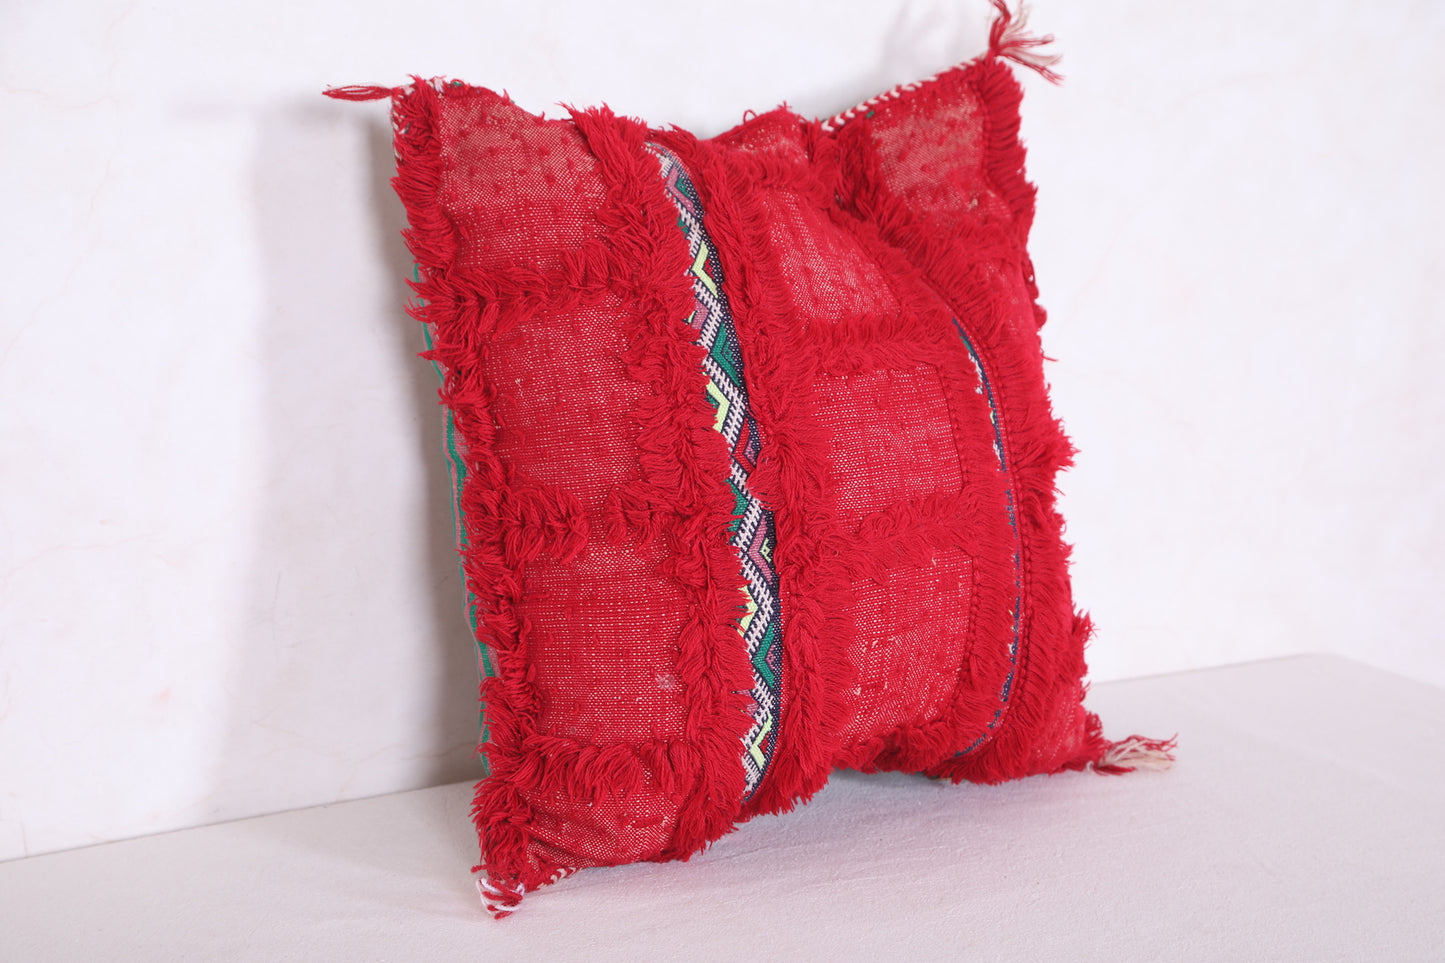 Sqaure Moroccan red pillow 16.5 INCHES X 16.5 INCHES